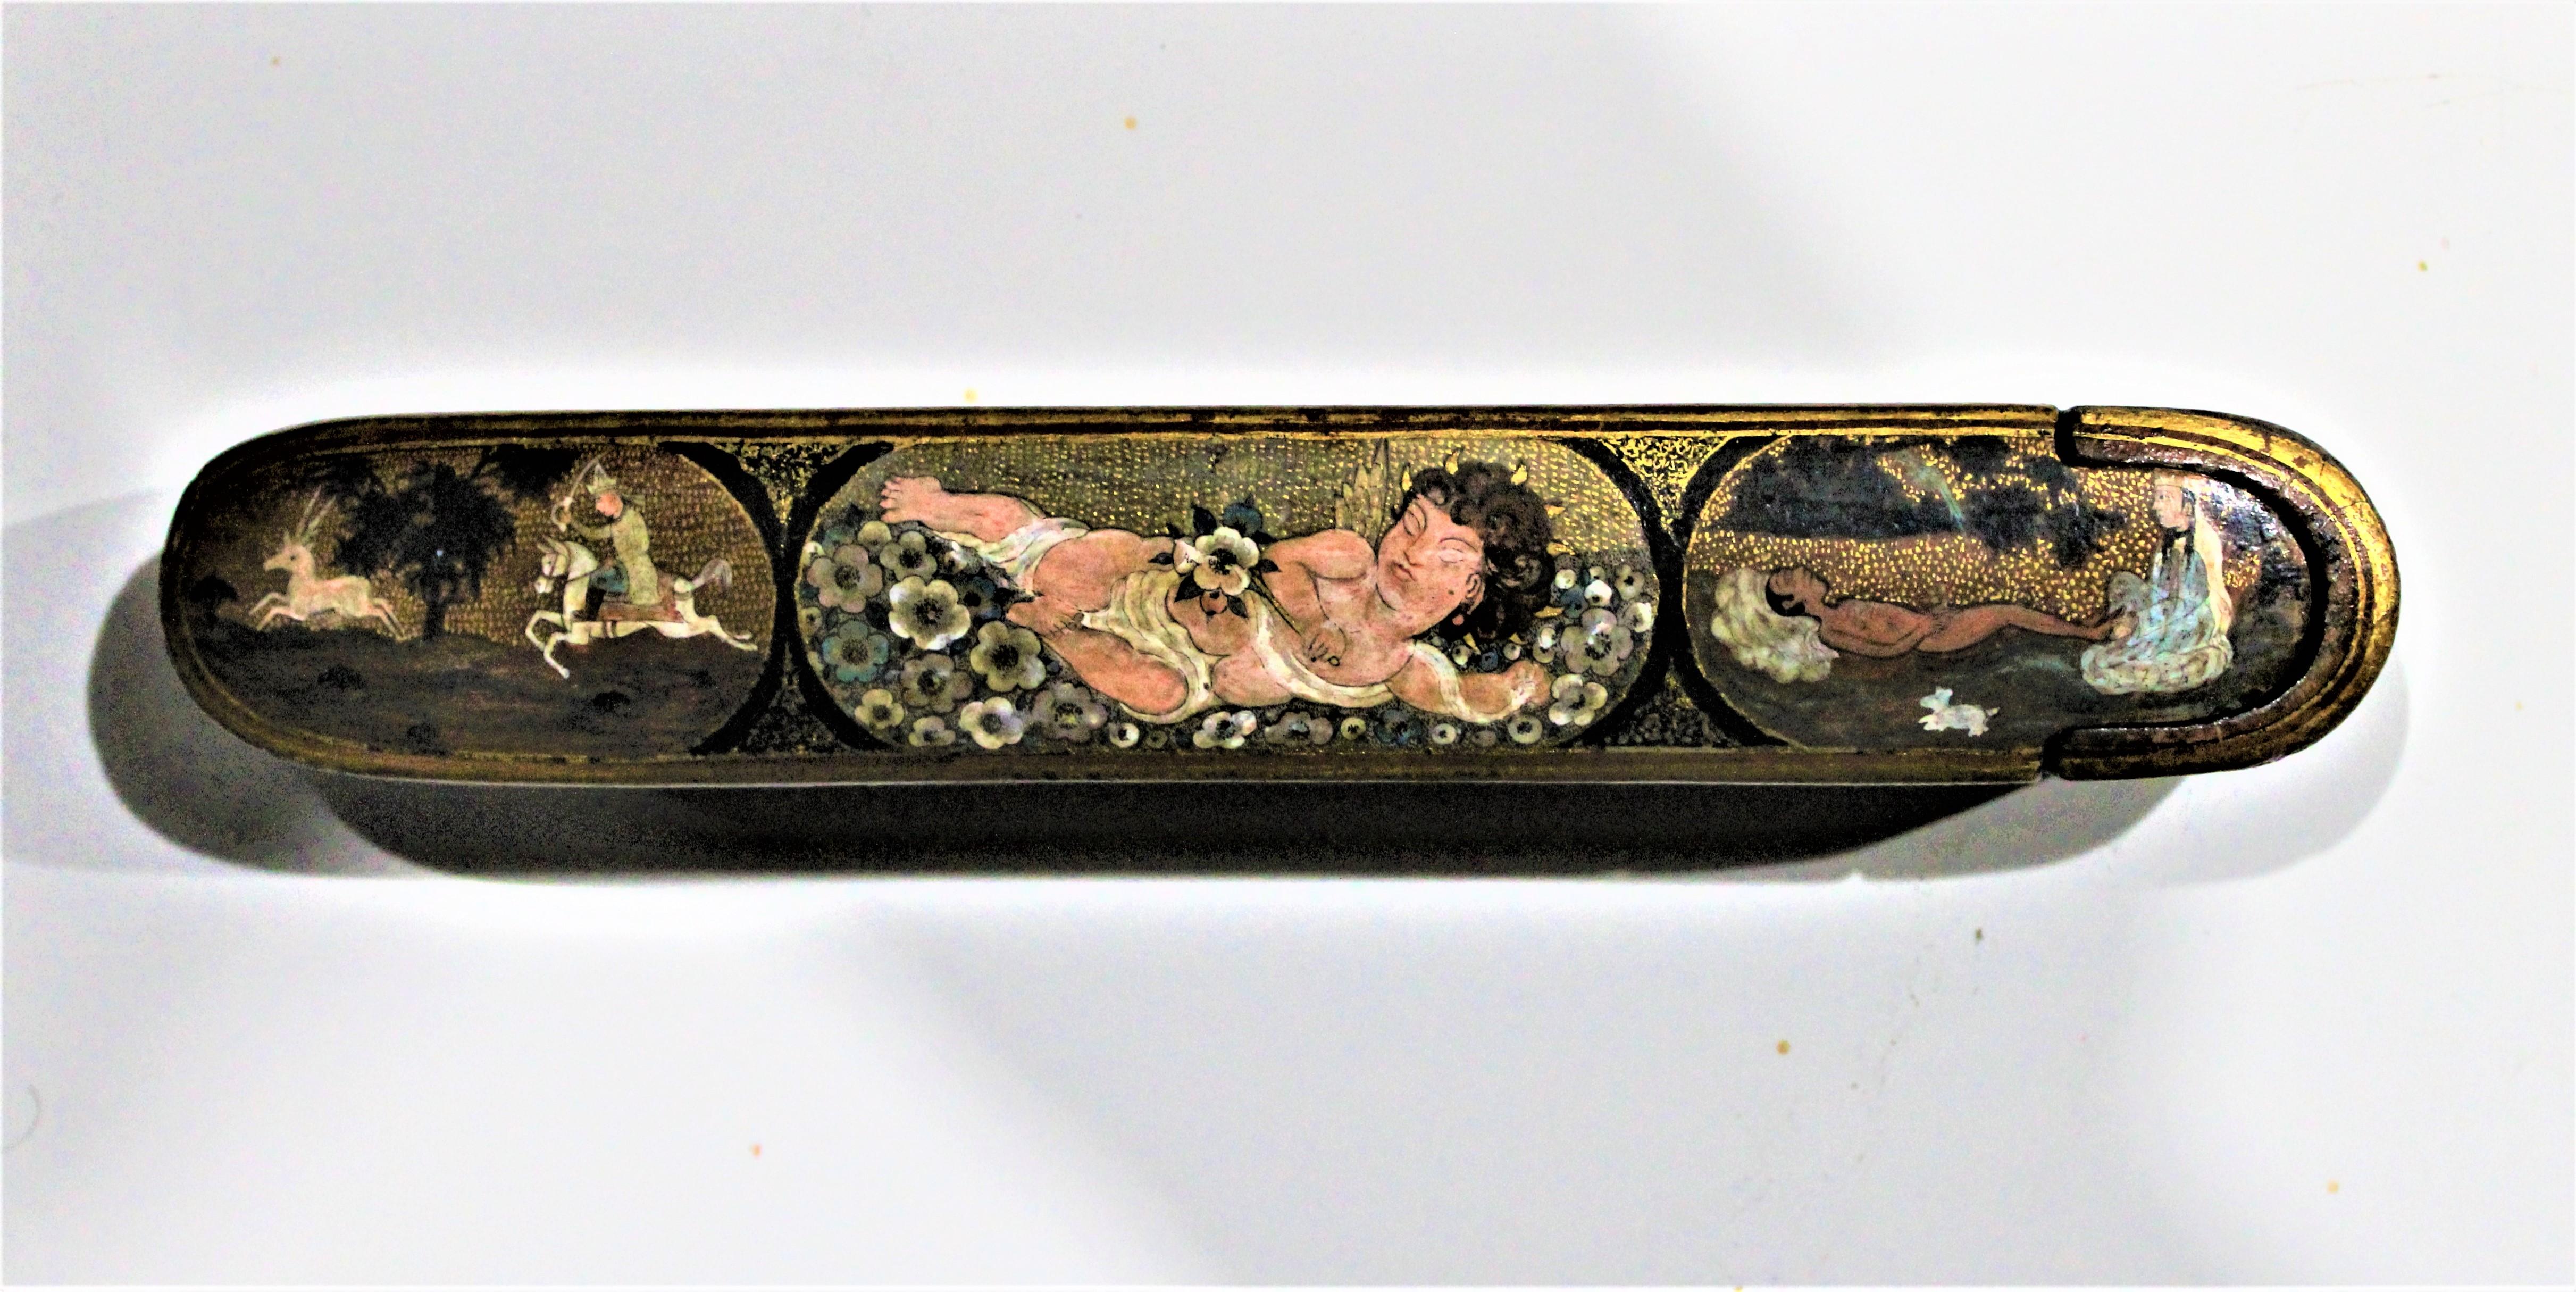 Dating from the early 19th century or Qajar period, this antique hand painted pen box is done in a series of bordered vignettes of Persian men and animals and a reclining Persian woman prominently displayed on the central panel of the top. The box